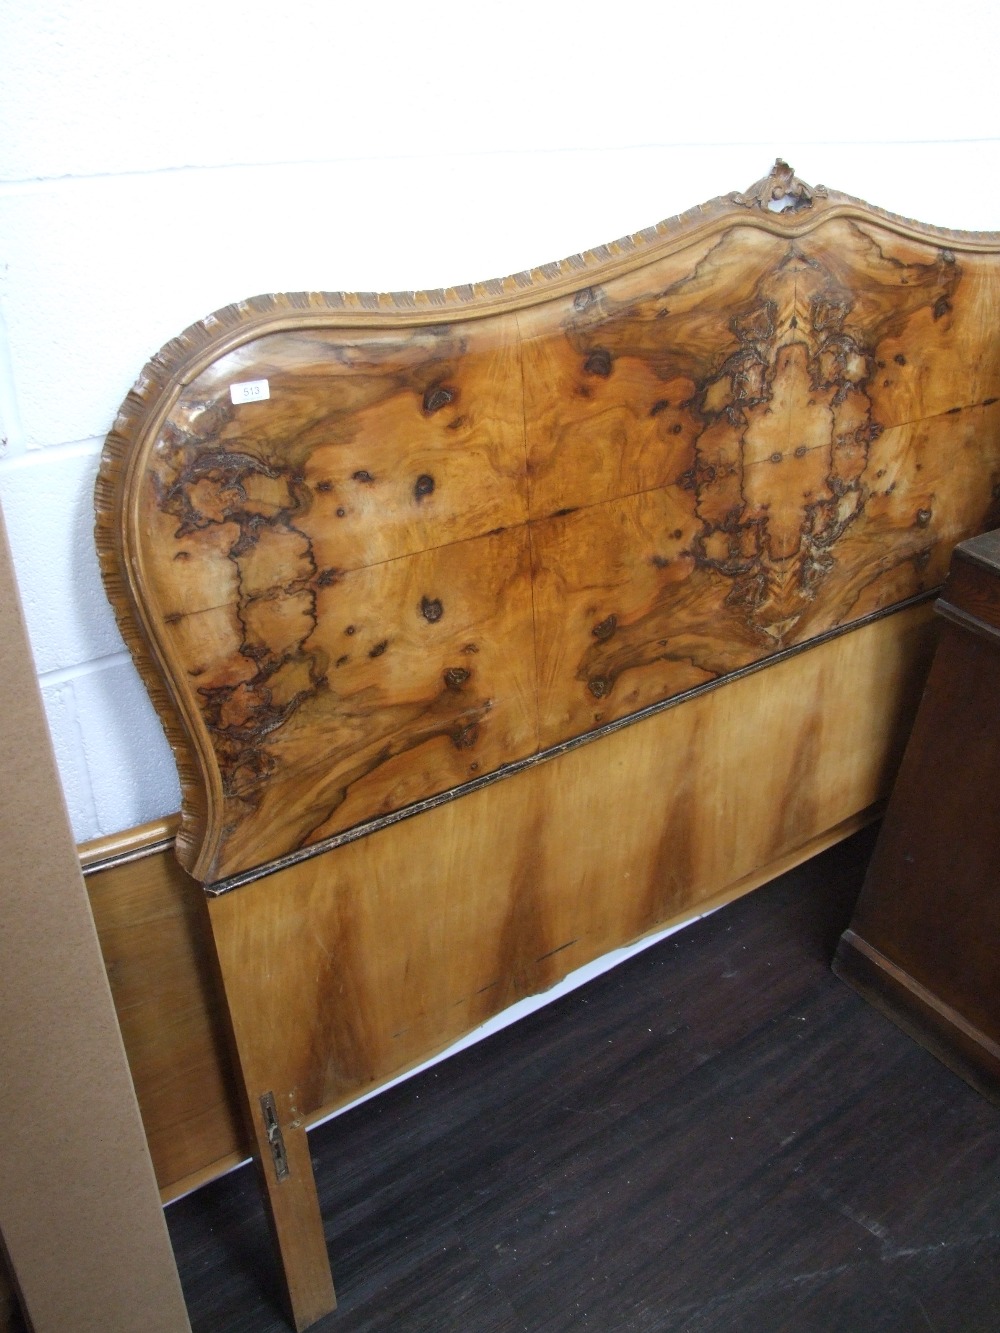 A period style burr wood double bedstead of French design